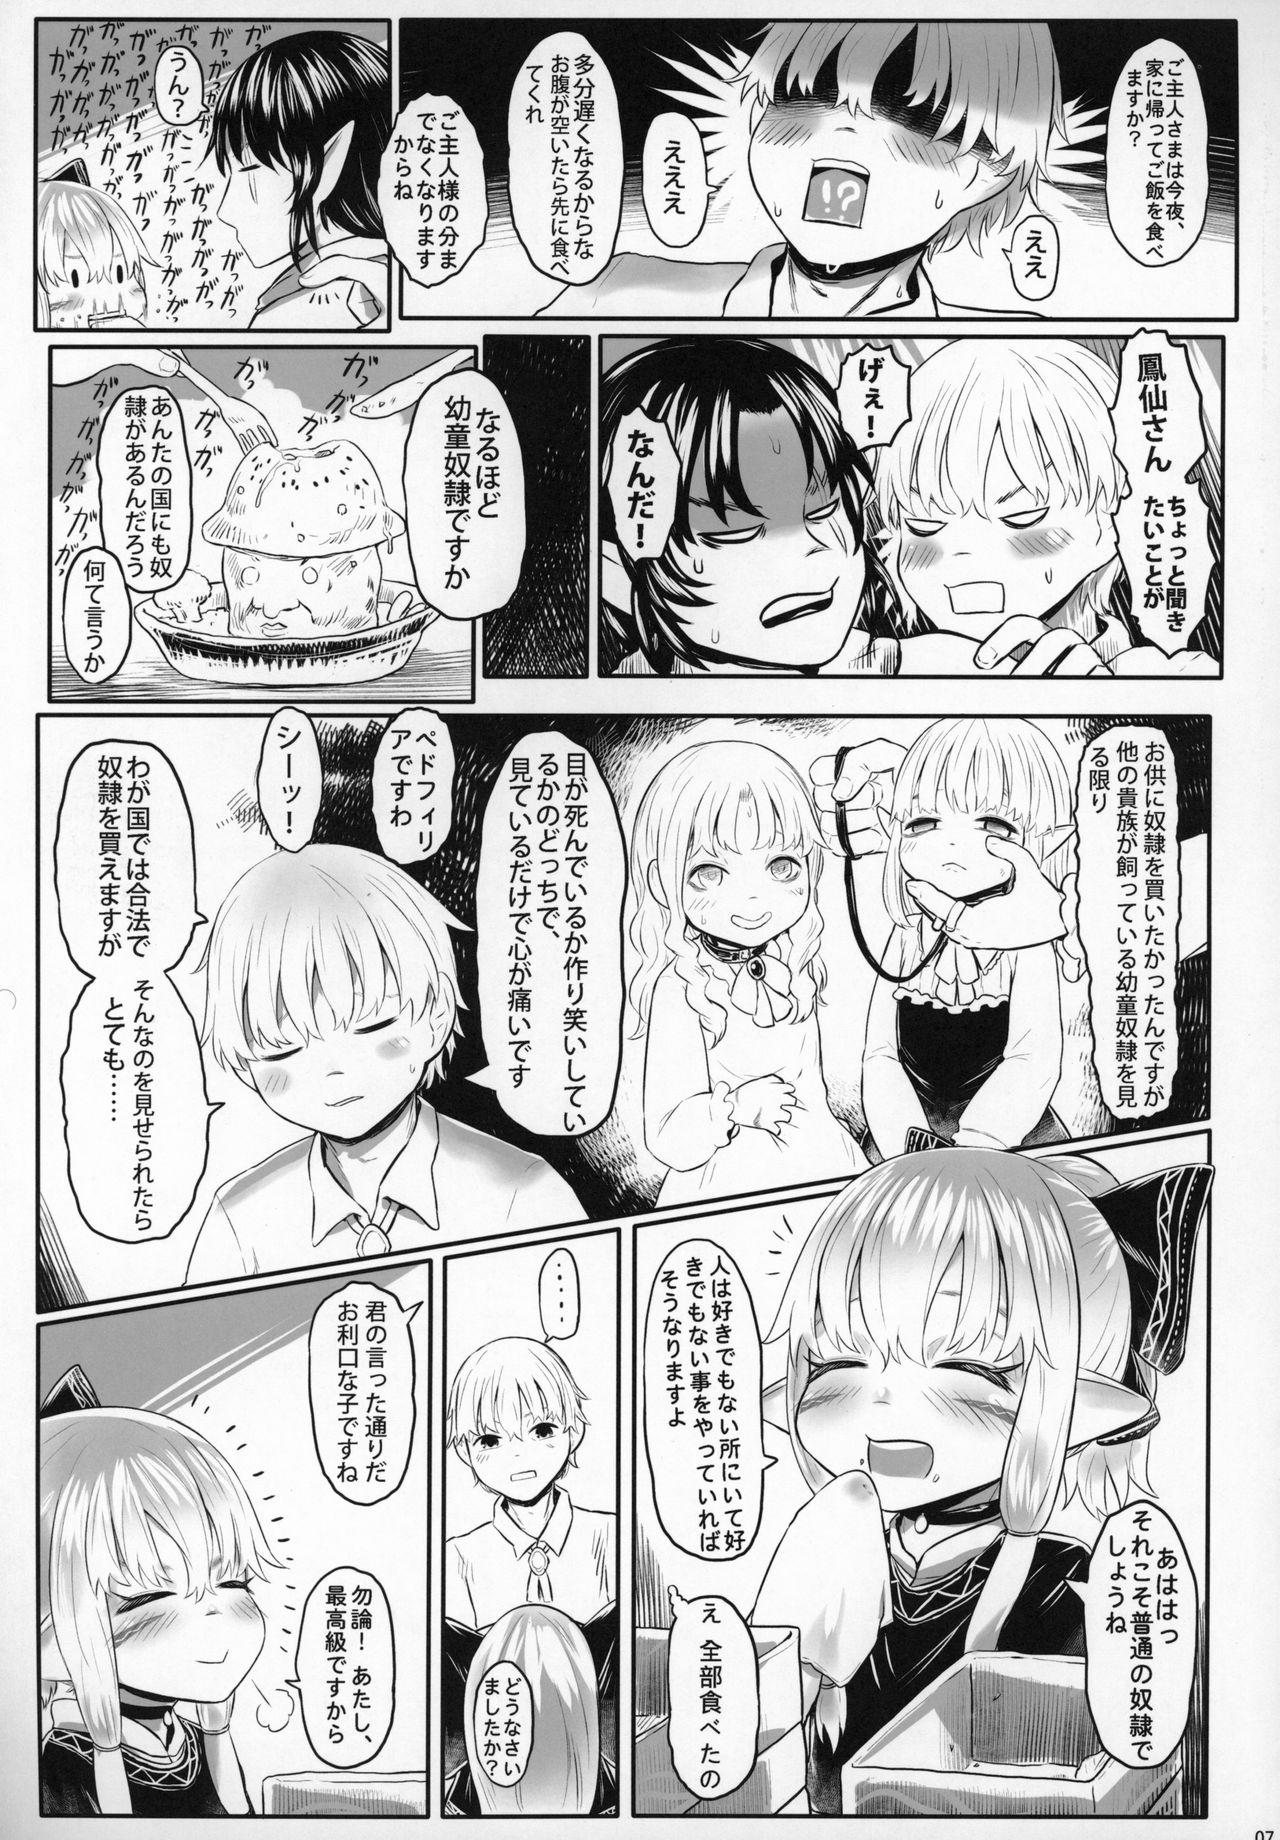 Athletic Aigan Youdo 06 - Original Brother Sister - Page 6